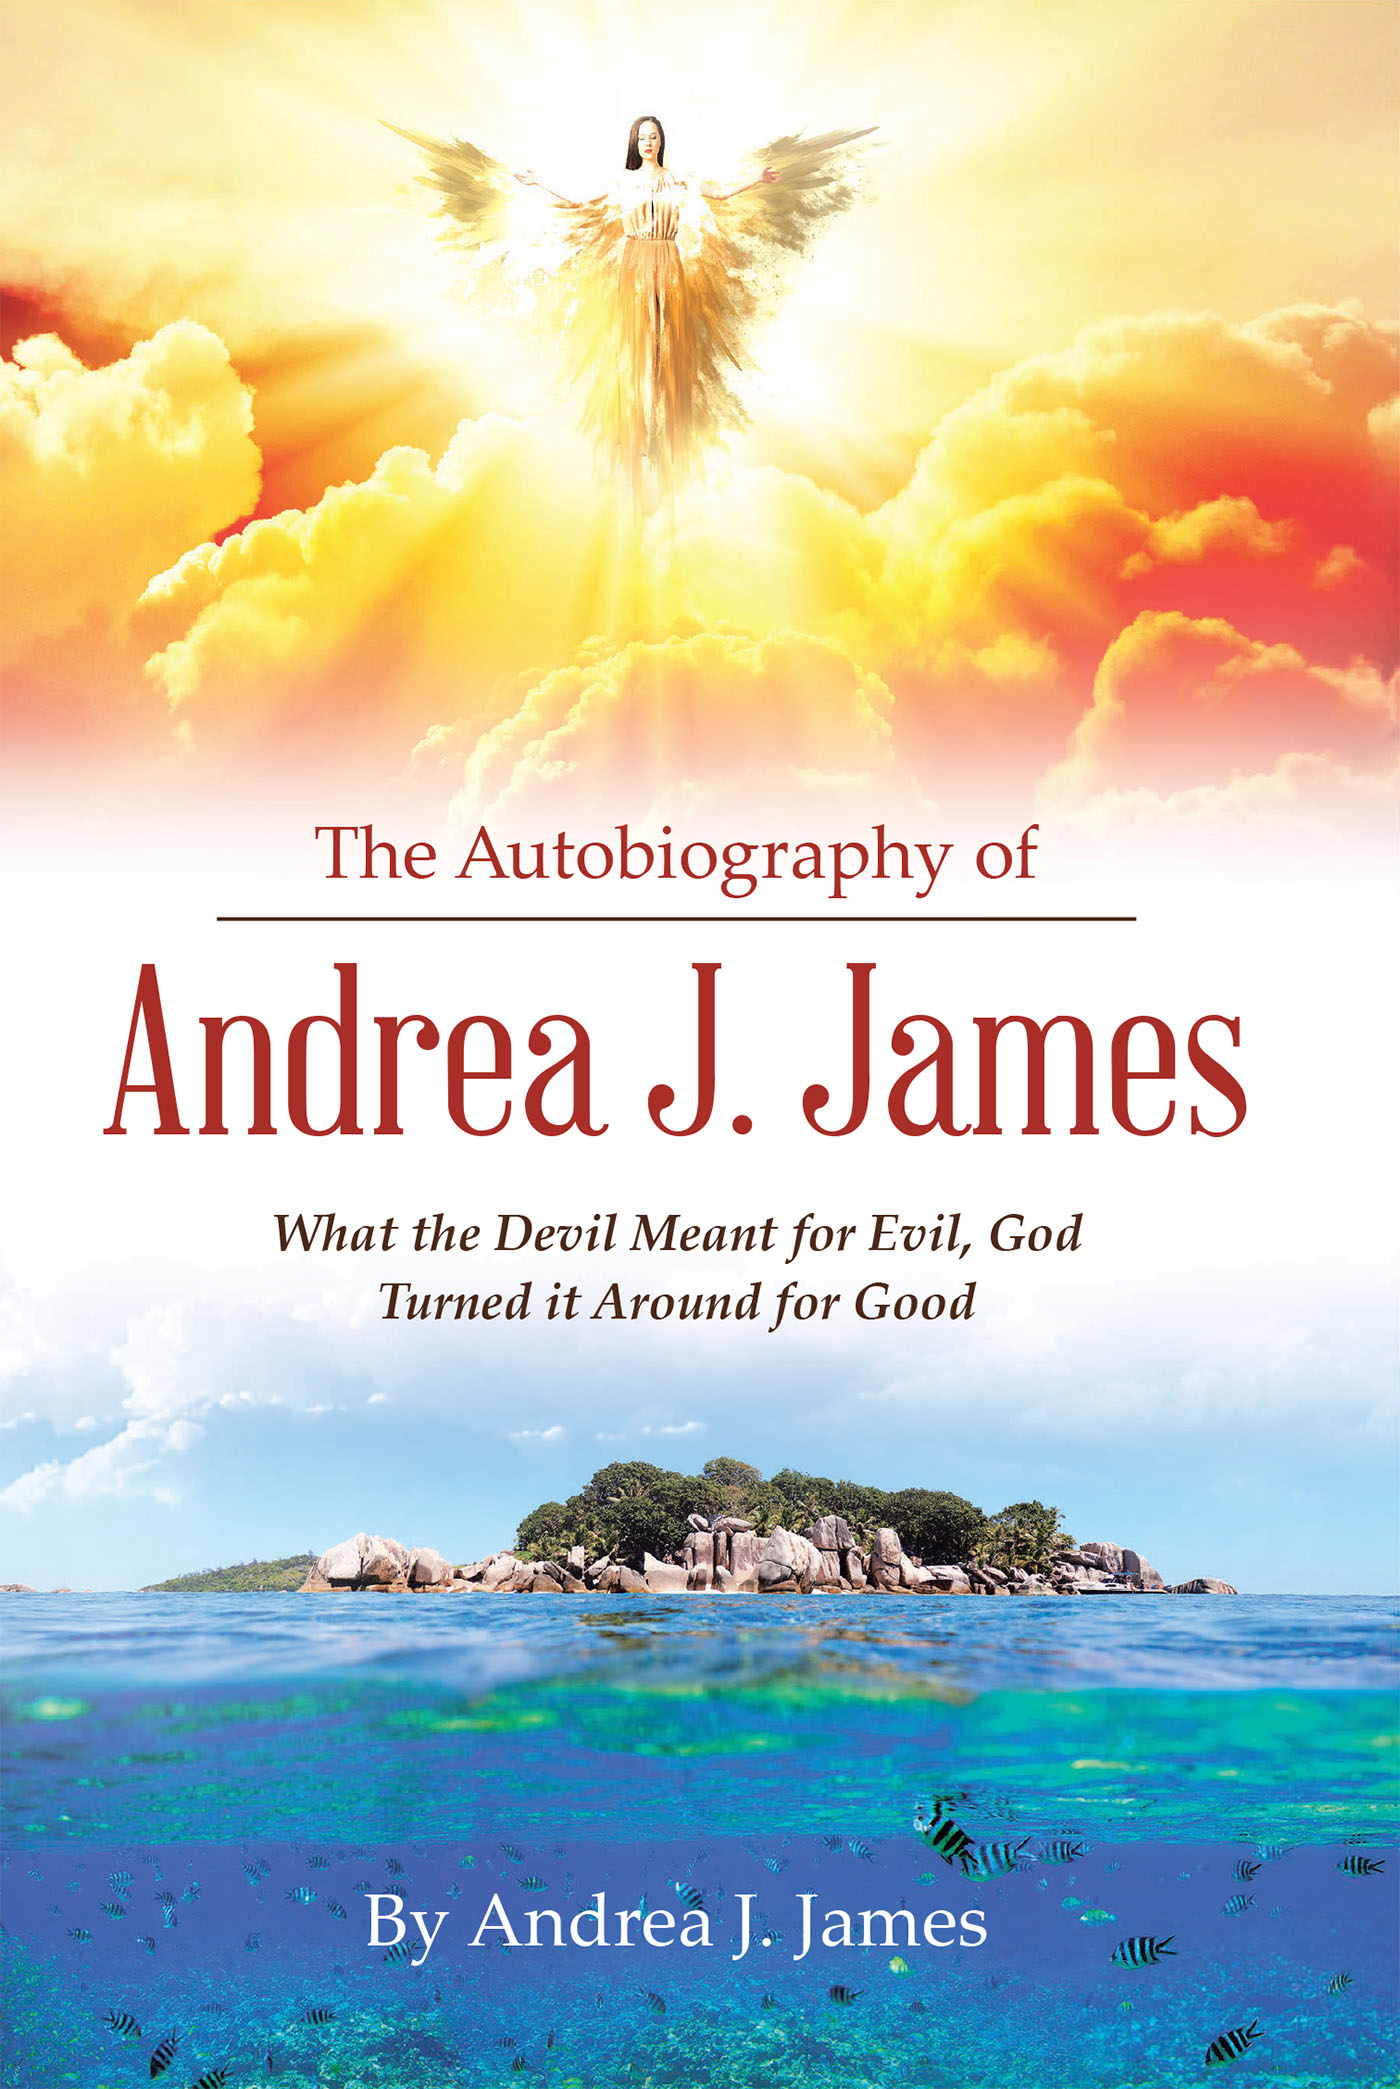 Author Andrea J. James’s New Book, "The Autobiography of Andrea J. James," Reveals How God Helped the Author Change the Trajectory of Her Life Before It Was Too Late